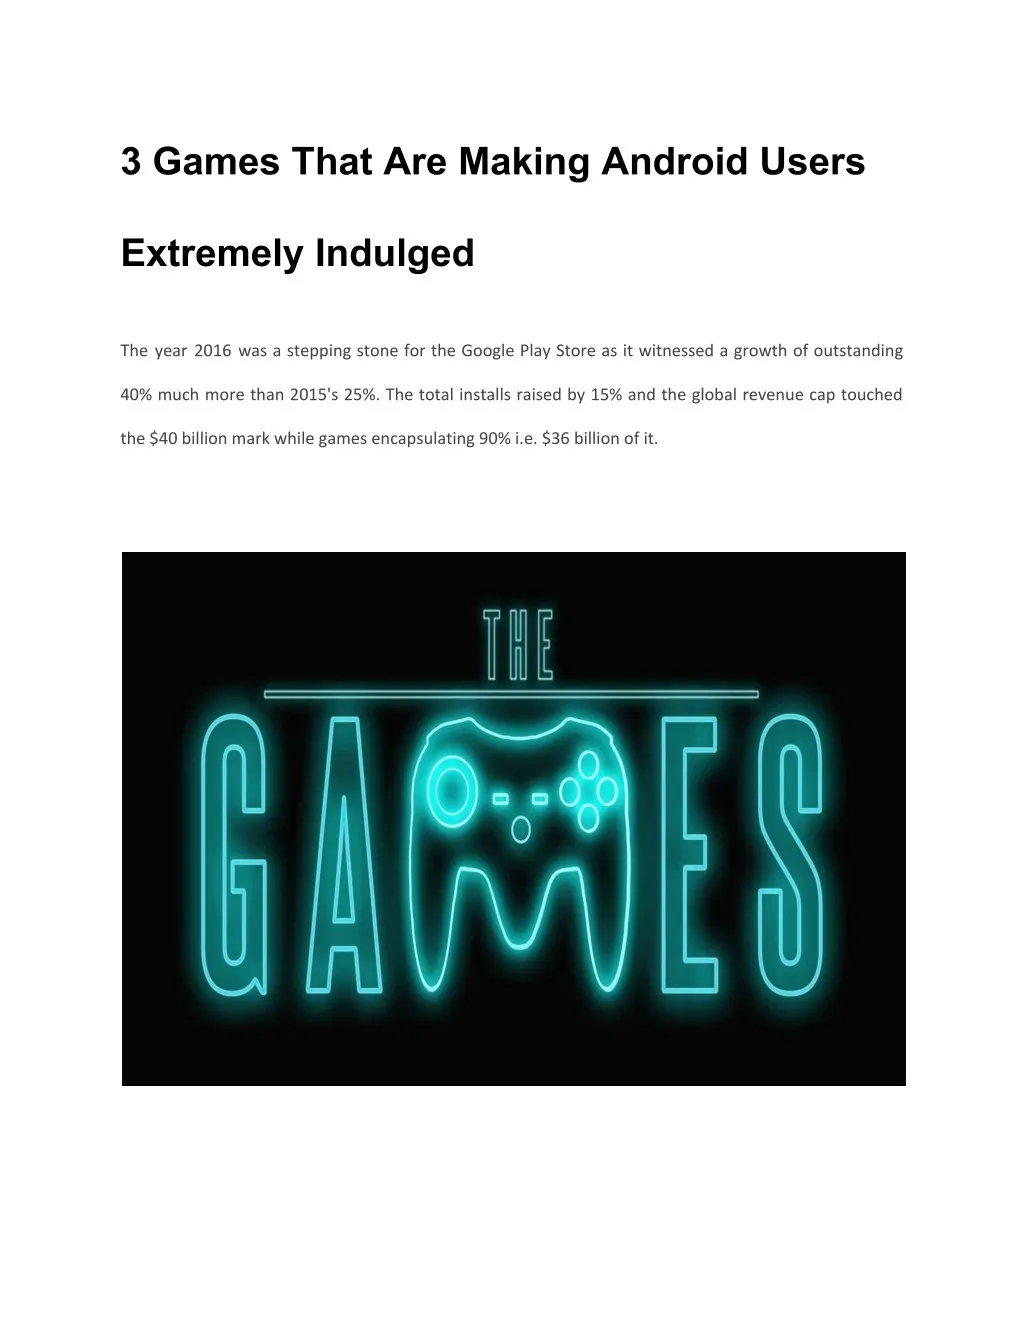 3 games that are making android users